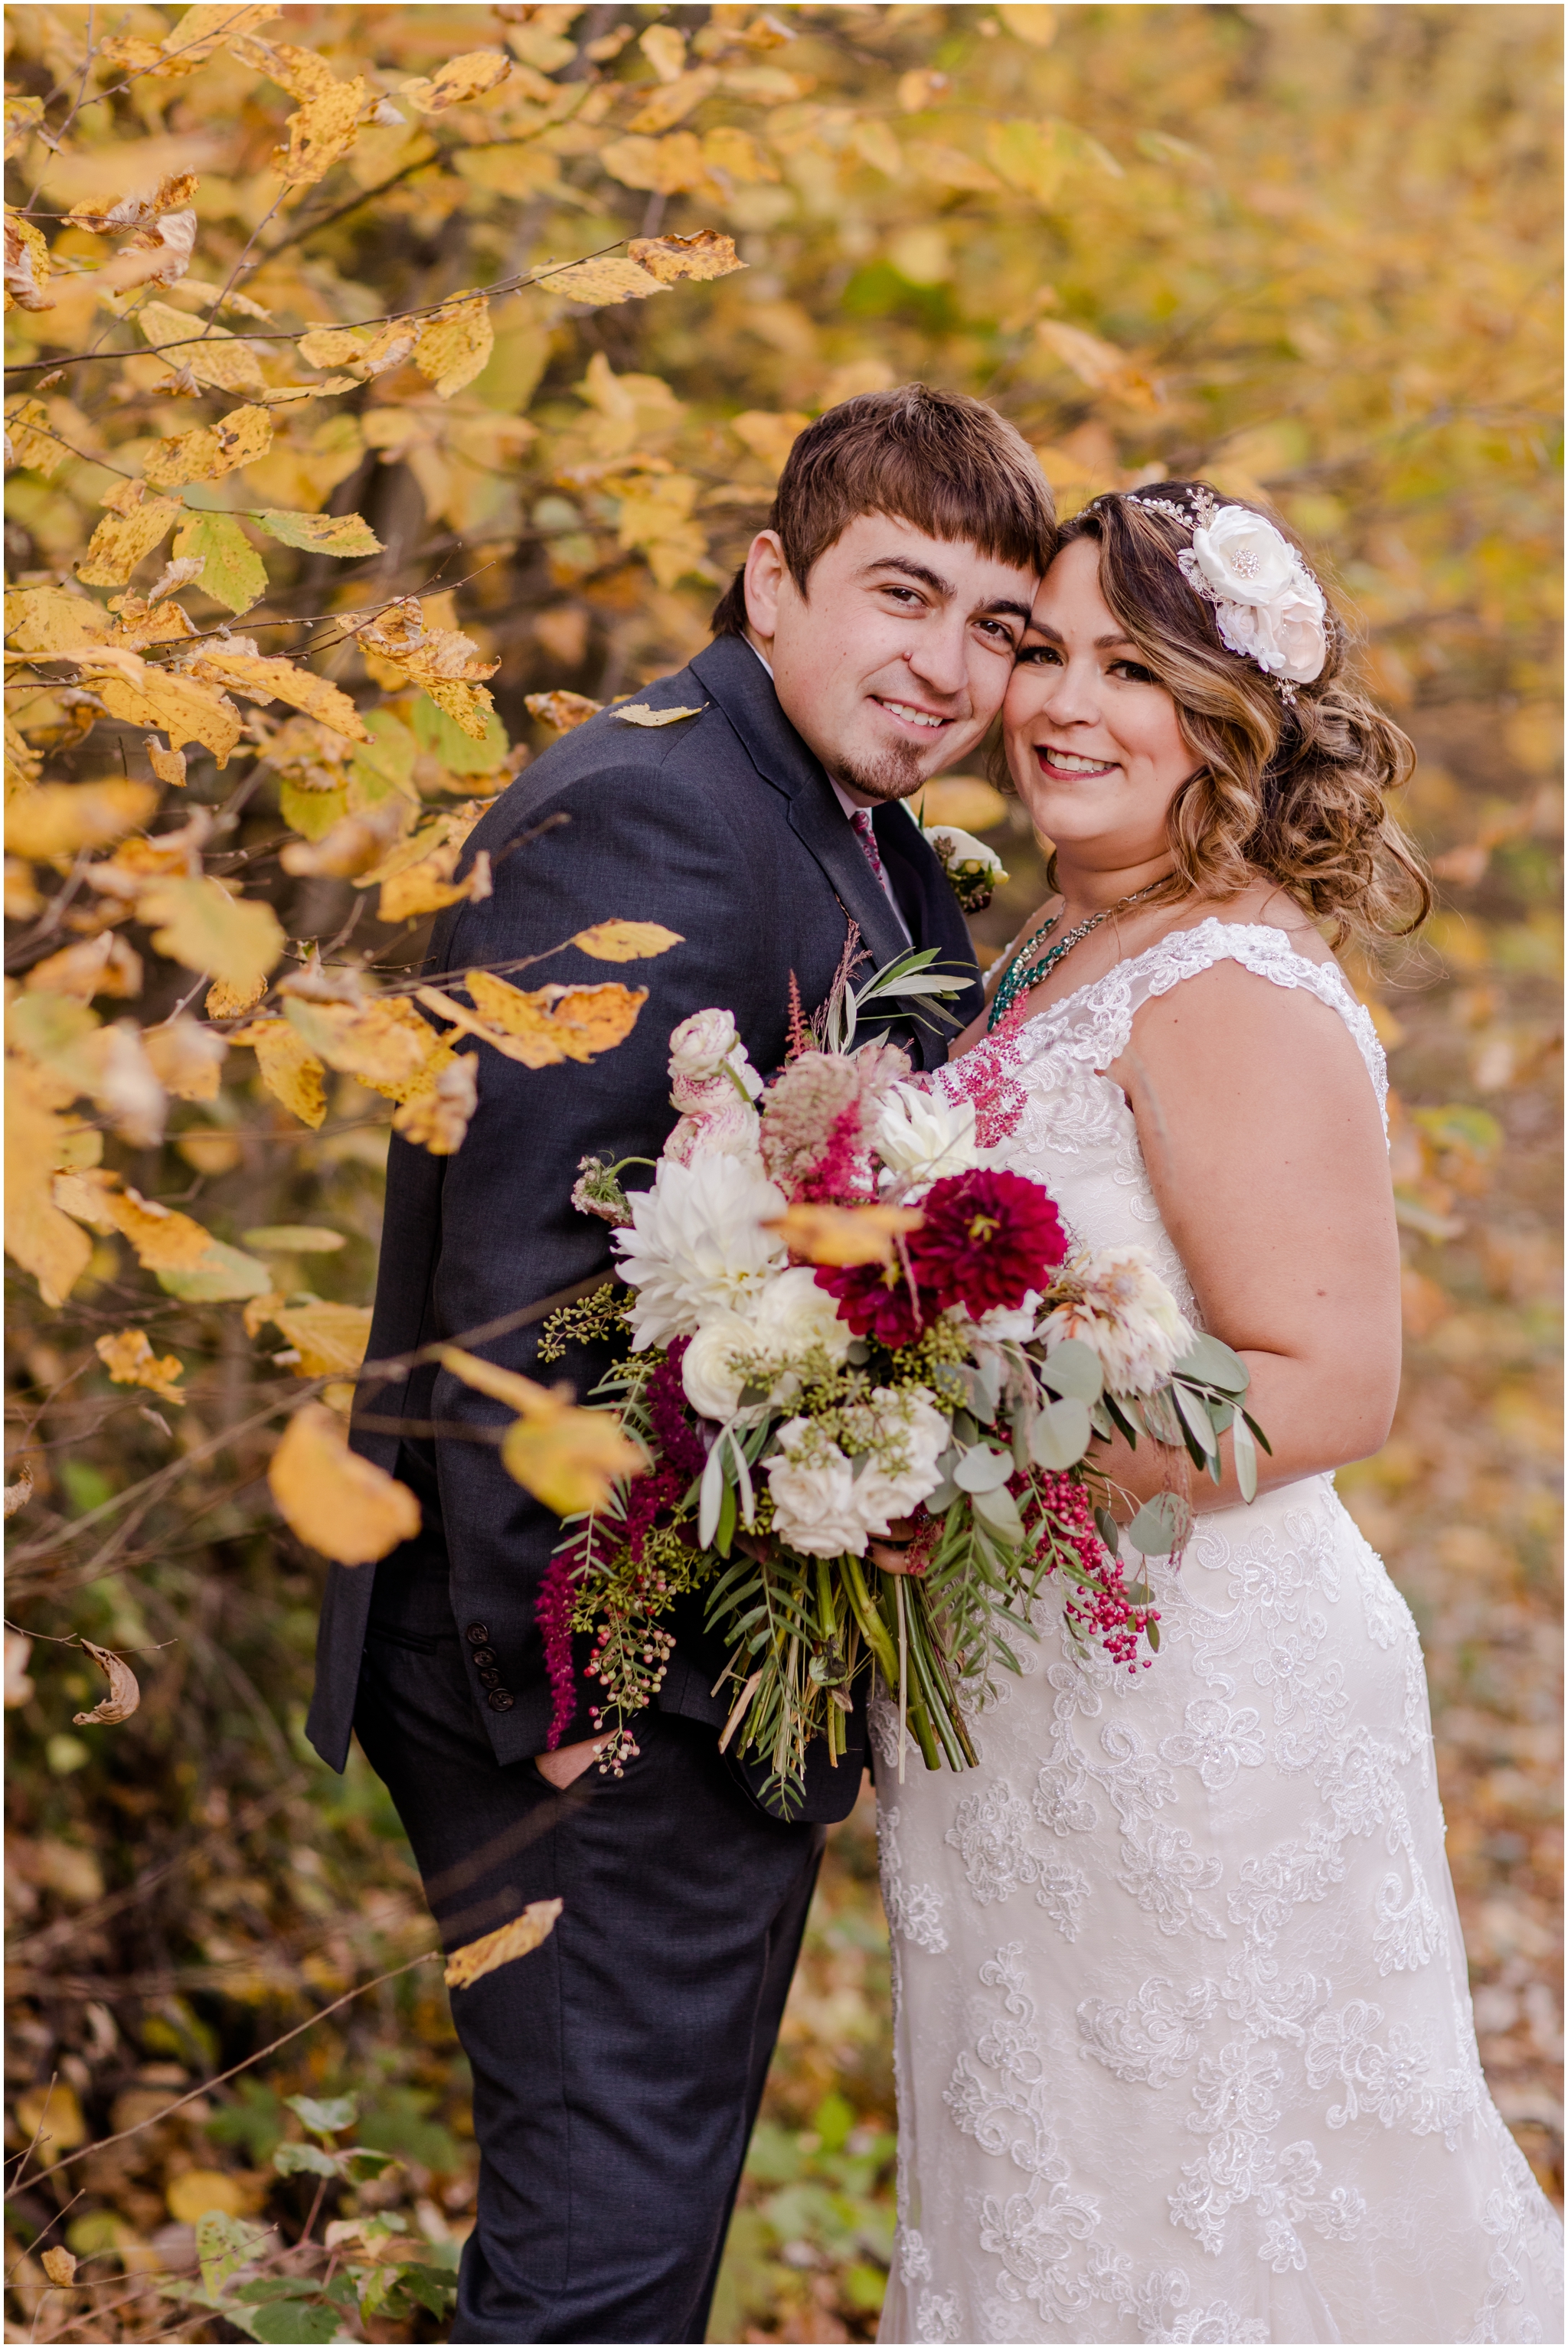 Staci and Nick | Brittney and Caleb